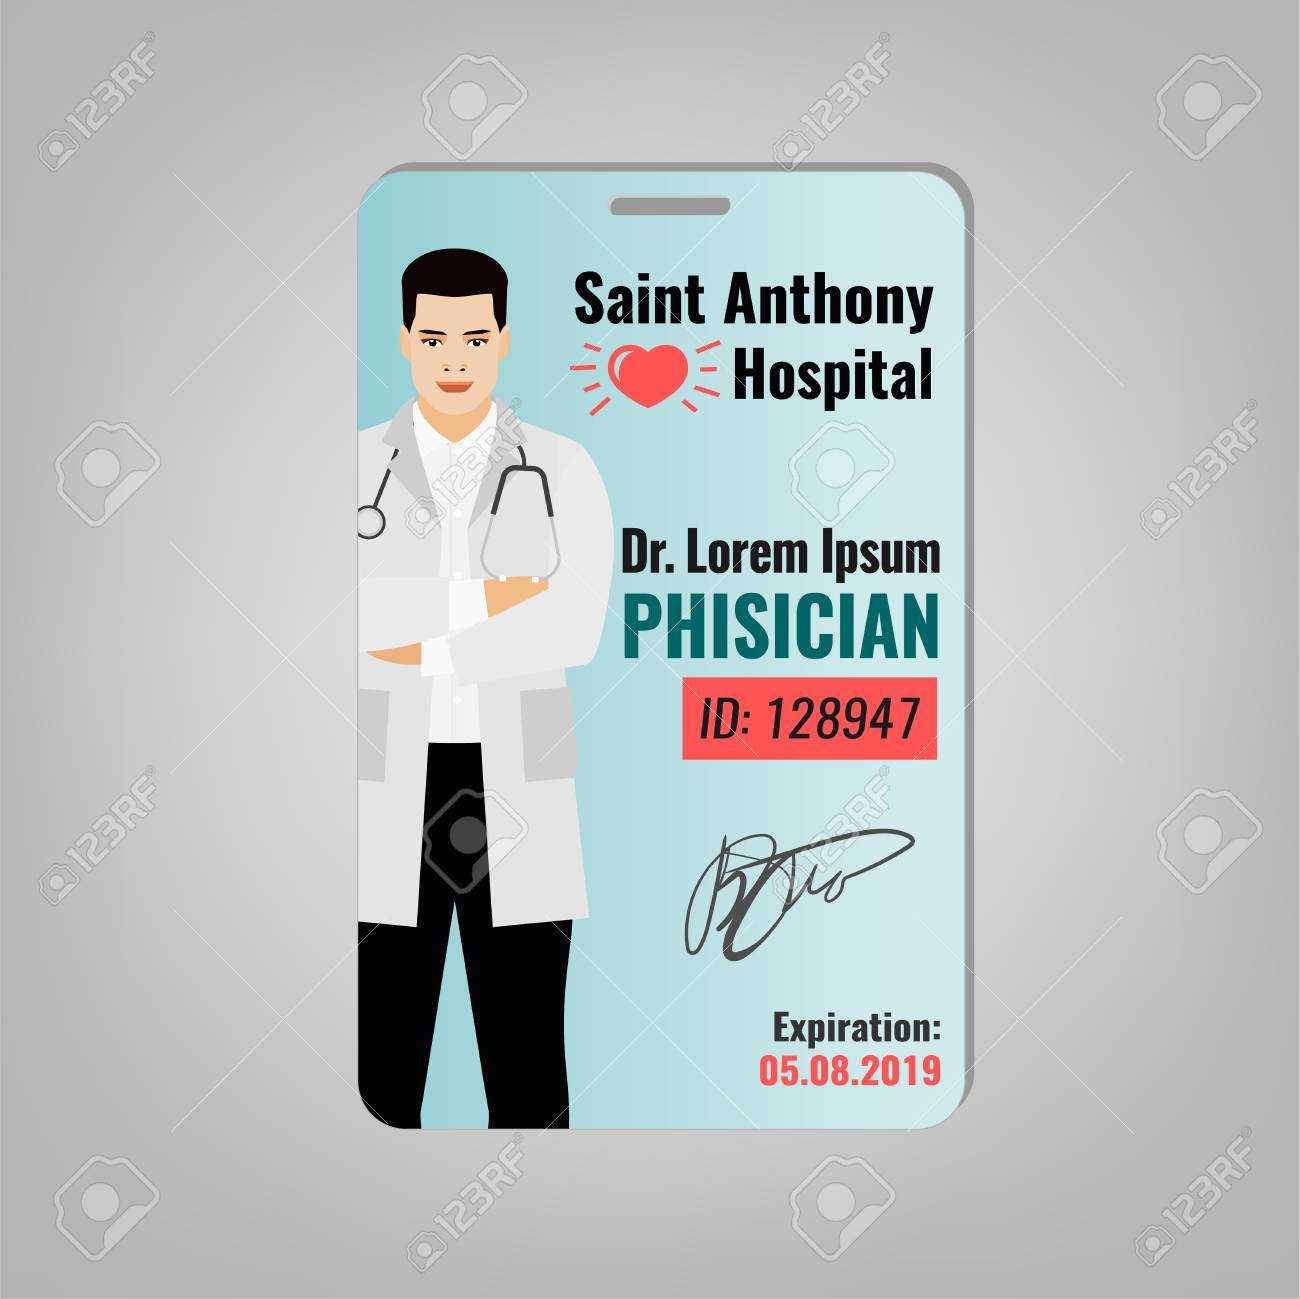 Doctors Id Card With Hospital Logo And Phisician Image. Medical.. Intended For Hospital Id Card Template